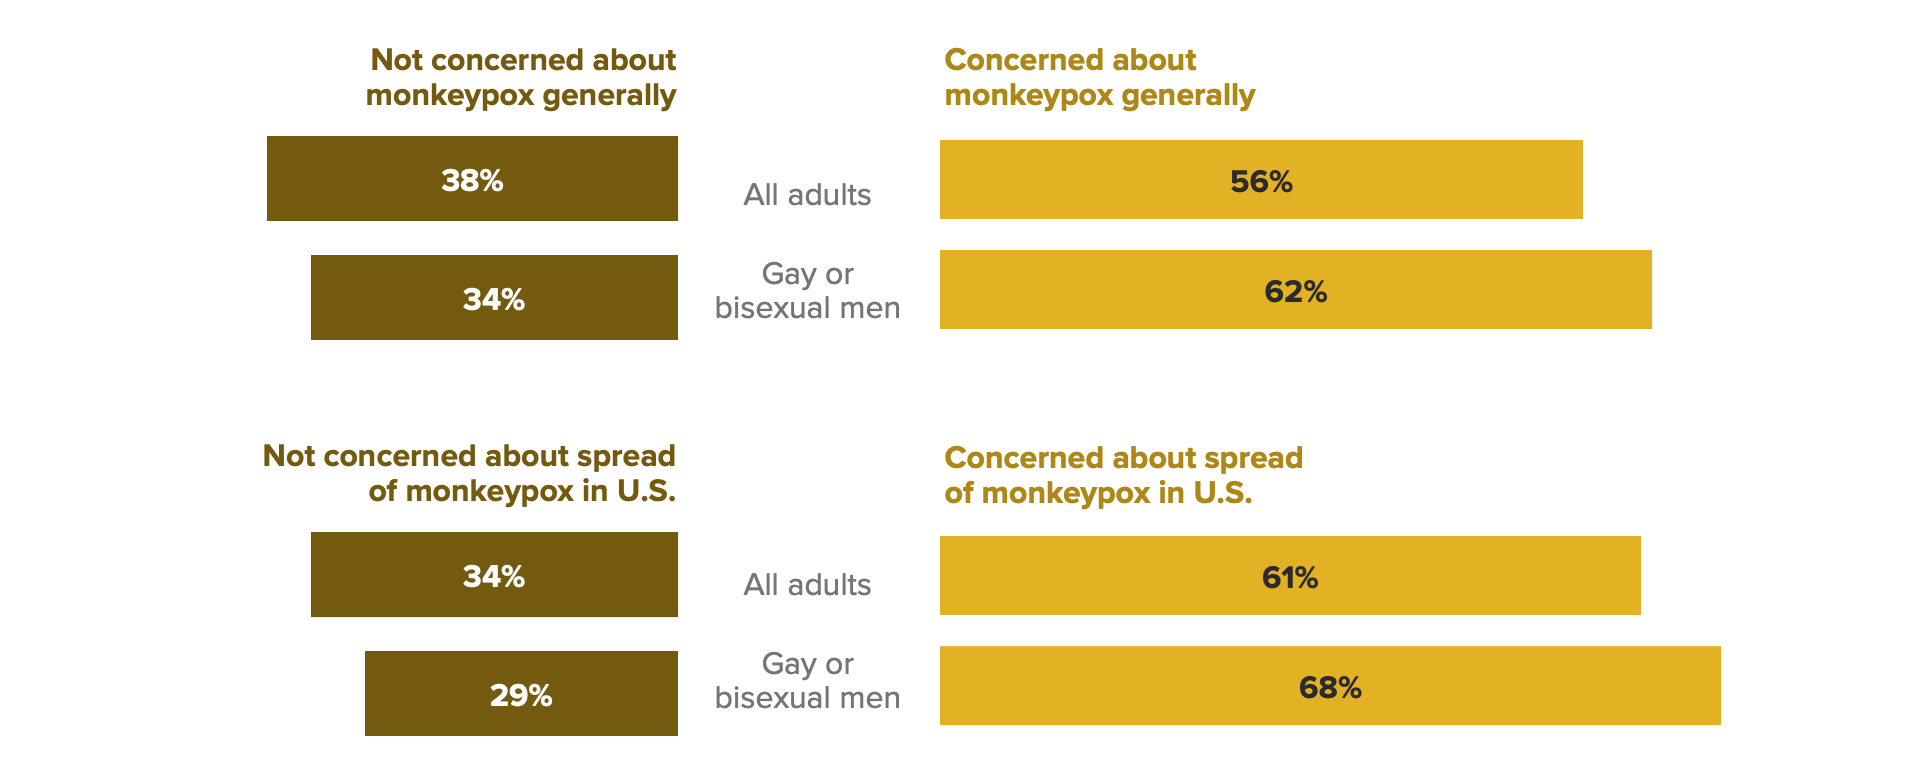 Butterfly chart of concern about monkeypox, showing gay or bisexual men are only slightly more concerned than the general public about the disease.